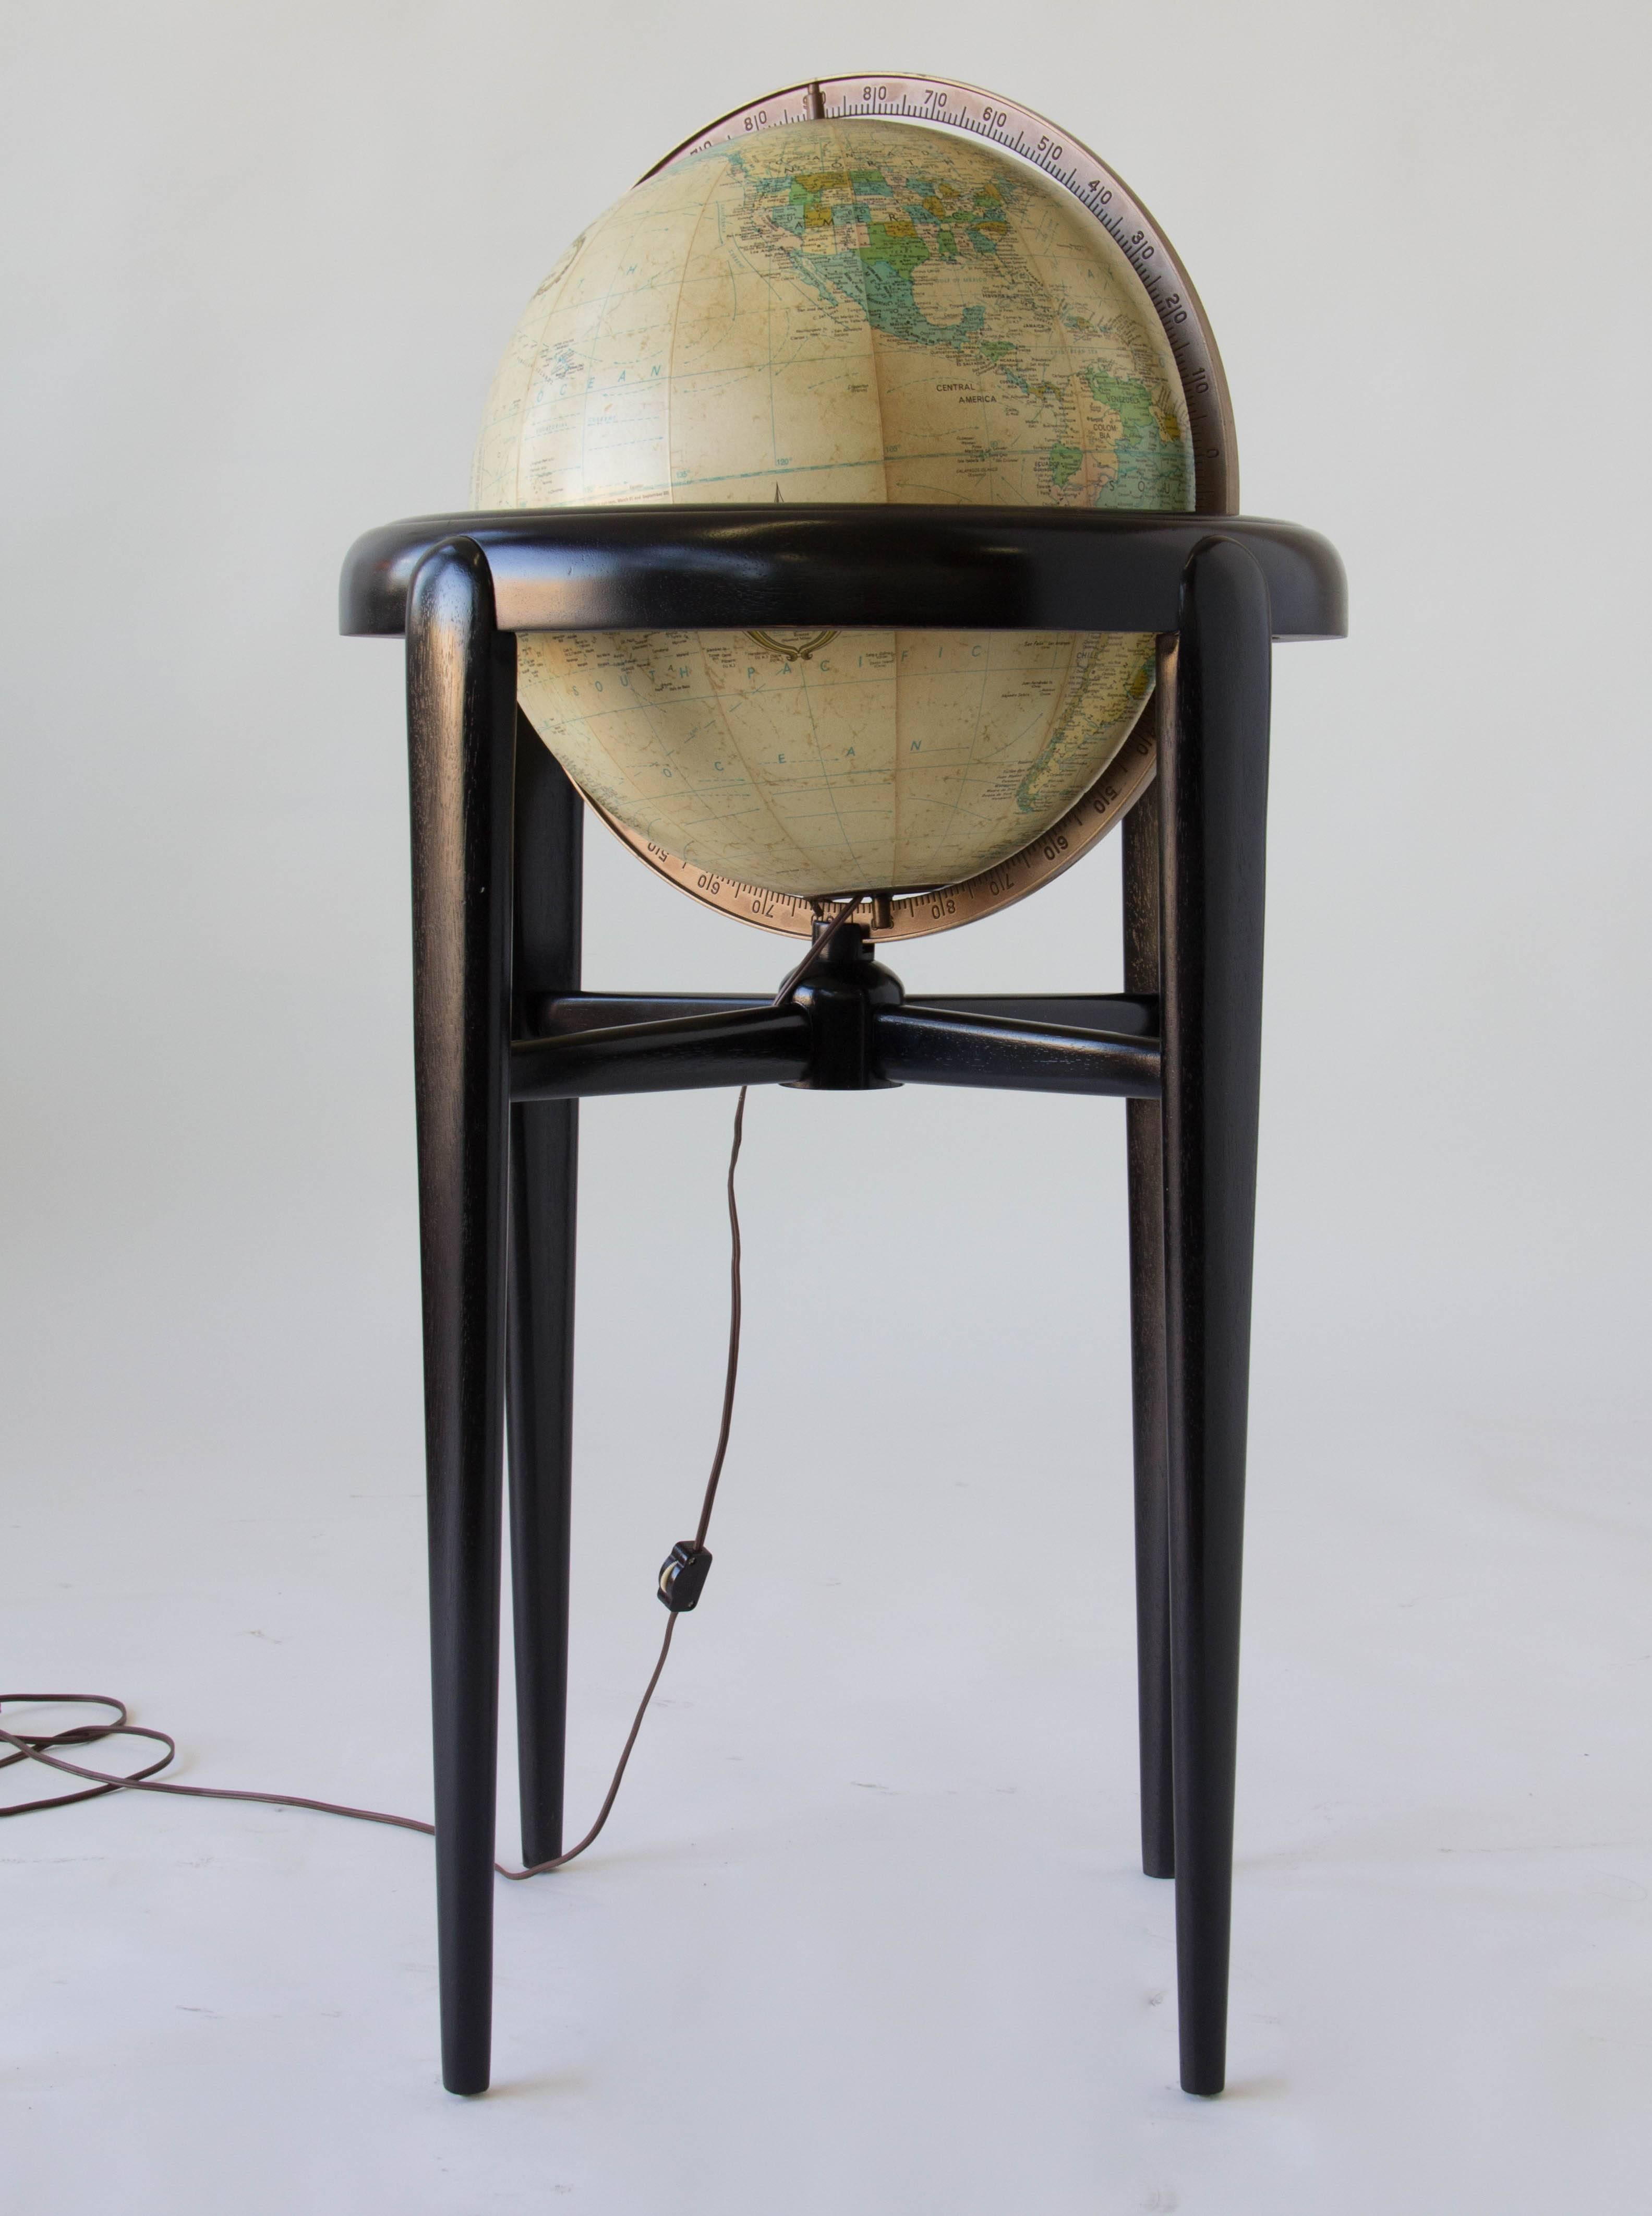 An Heirloom Globe by Replogle in a wooden stand with three tapered legs. The globe spins freely in the stand and can rotate on its vertical and horizontal axes. Plugs in to illuminate. 

Condition: Excellent vintage condition; stand has been